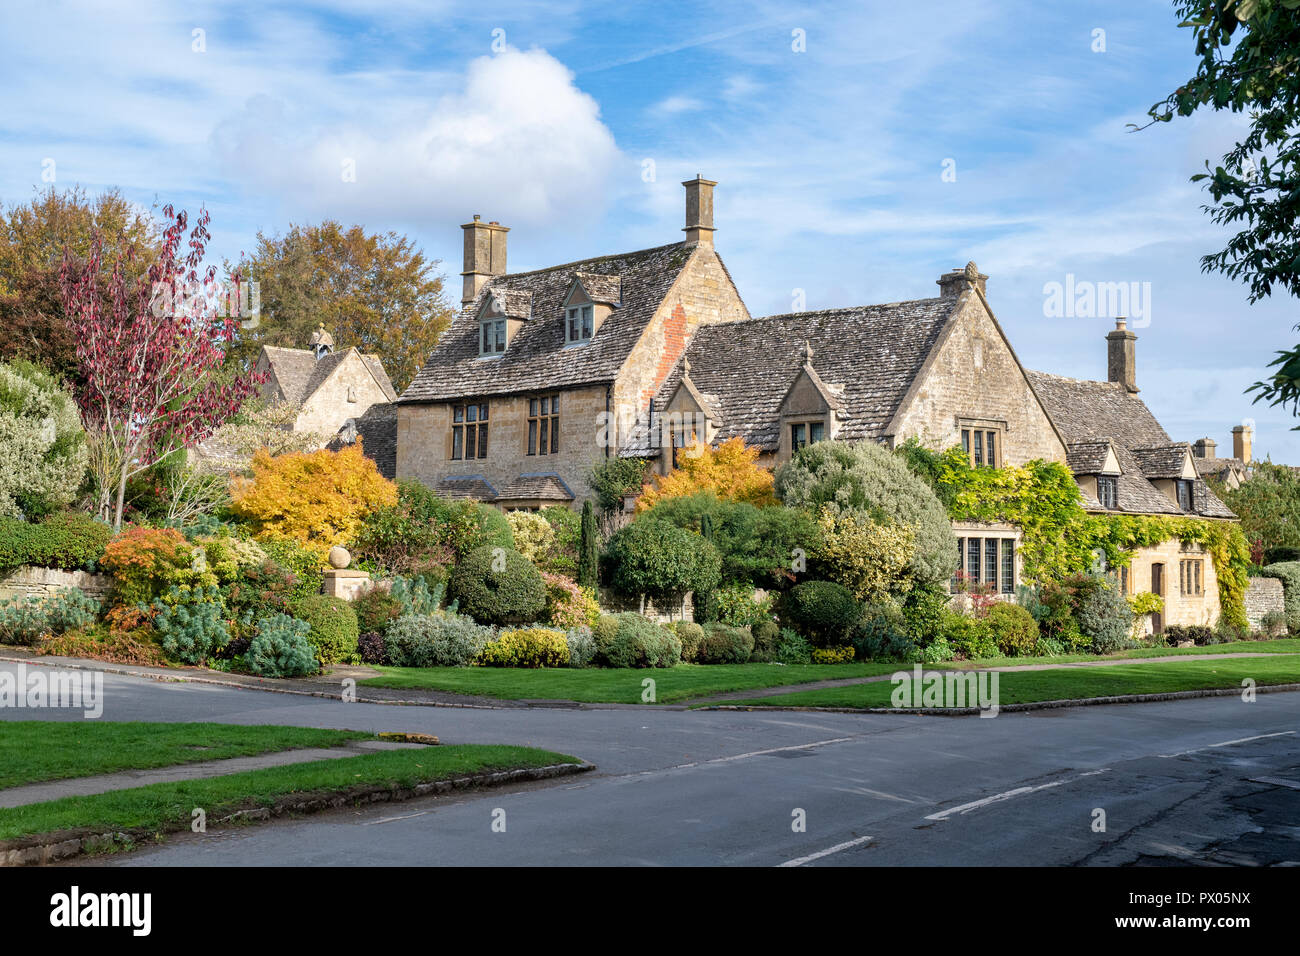 Autumn garden plant colours in front of a stone house. Chipping Campden, Cotswolds, Gloucestershire, England Stock Photo